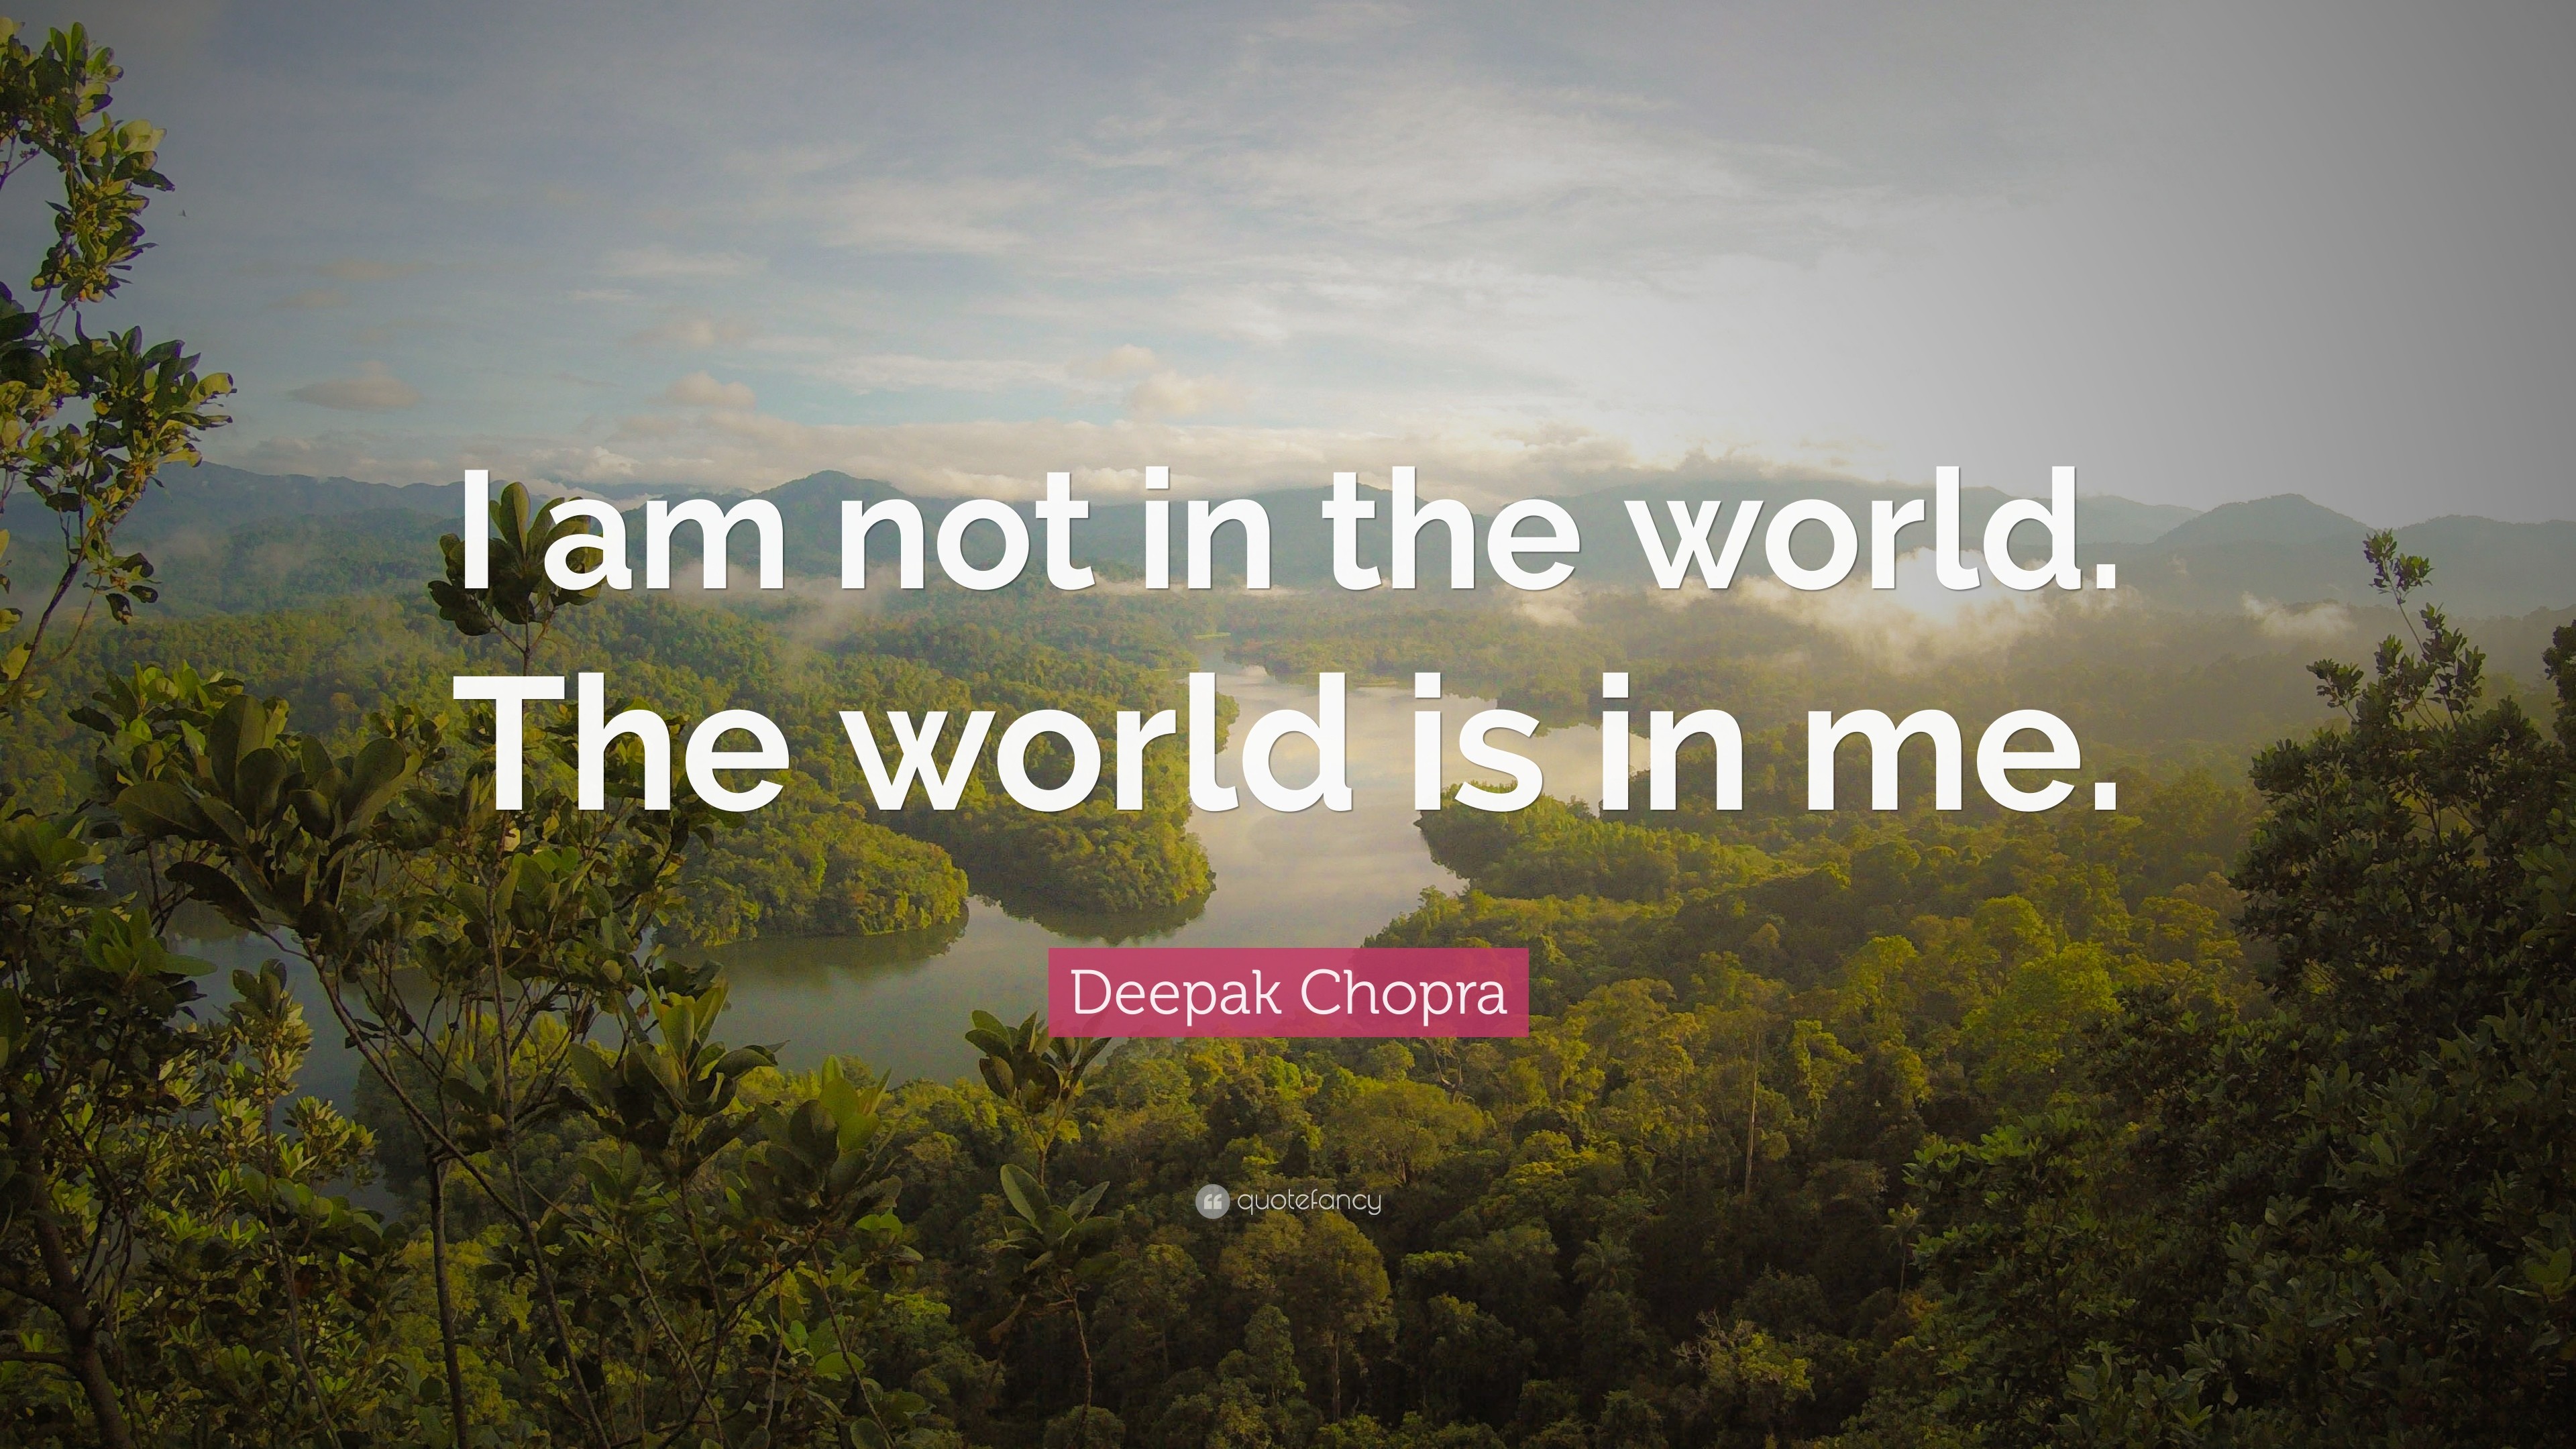 3840x2160 Deepak Chopra Quote: “I am not in the world. The world is in